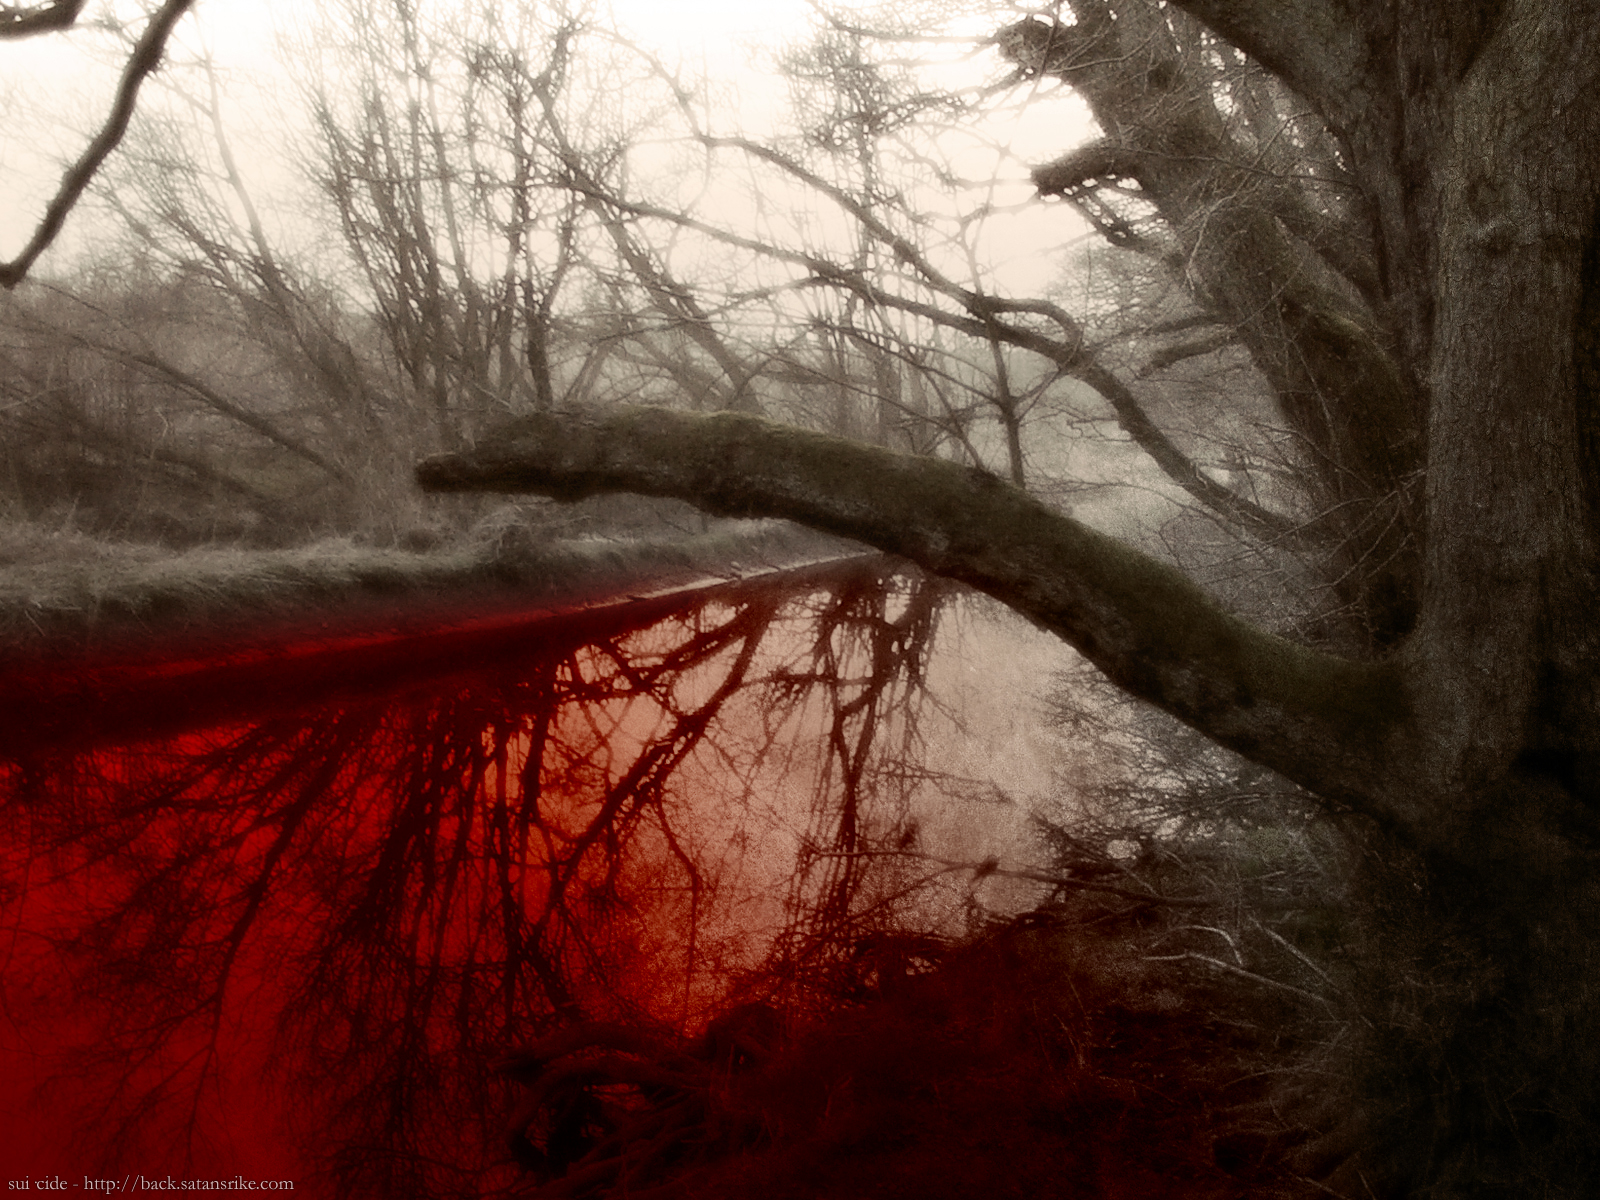 http://images2.layoutsparks.com/1/26876/suicide-trees-blood-water.jpg